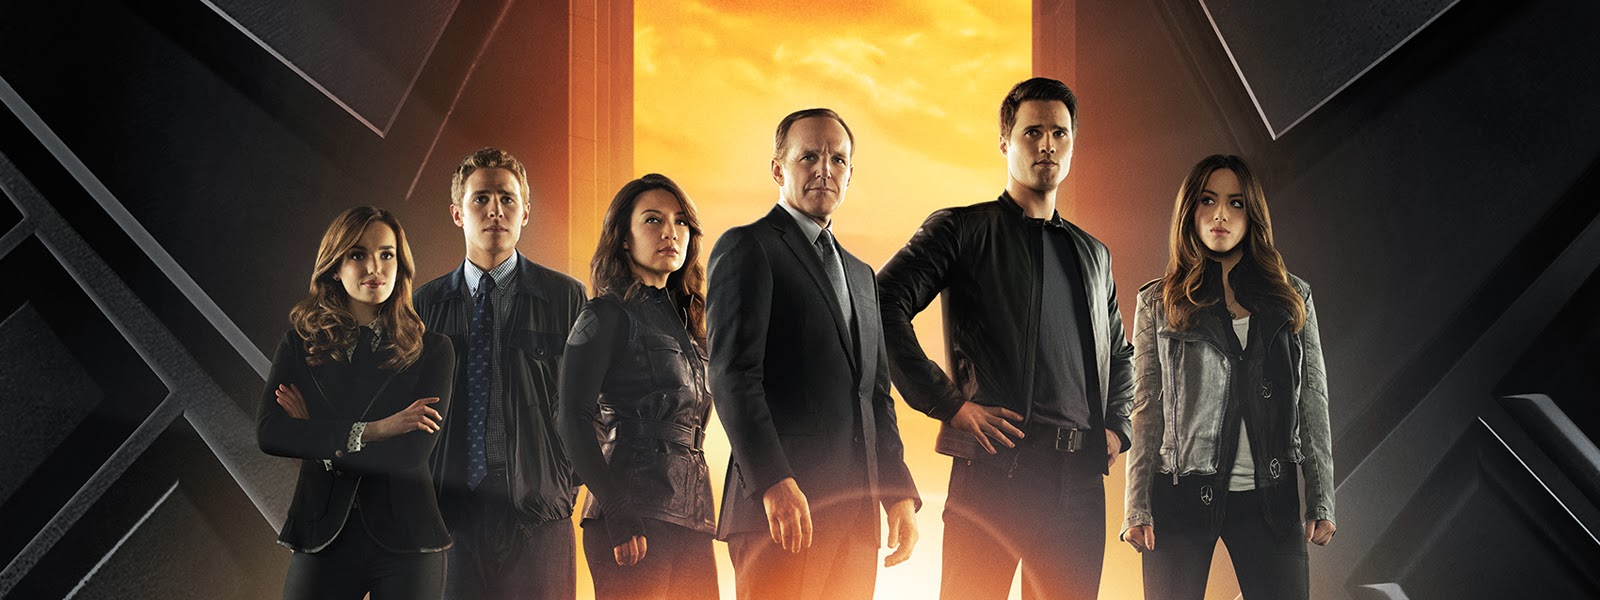 Poll: What Was Your Favorite Scene in Agents of S.H.I.E.L.D. "The Magical Place"?